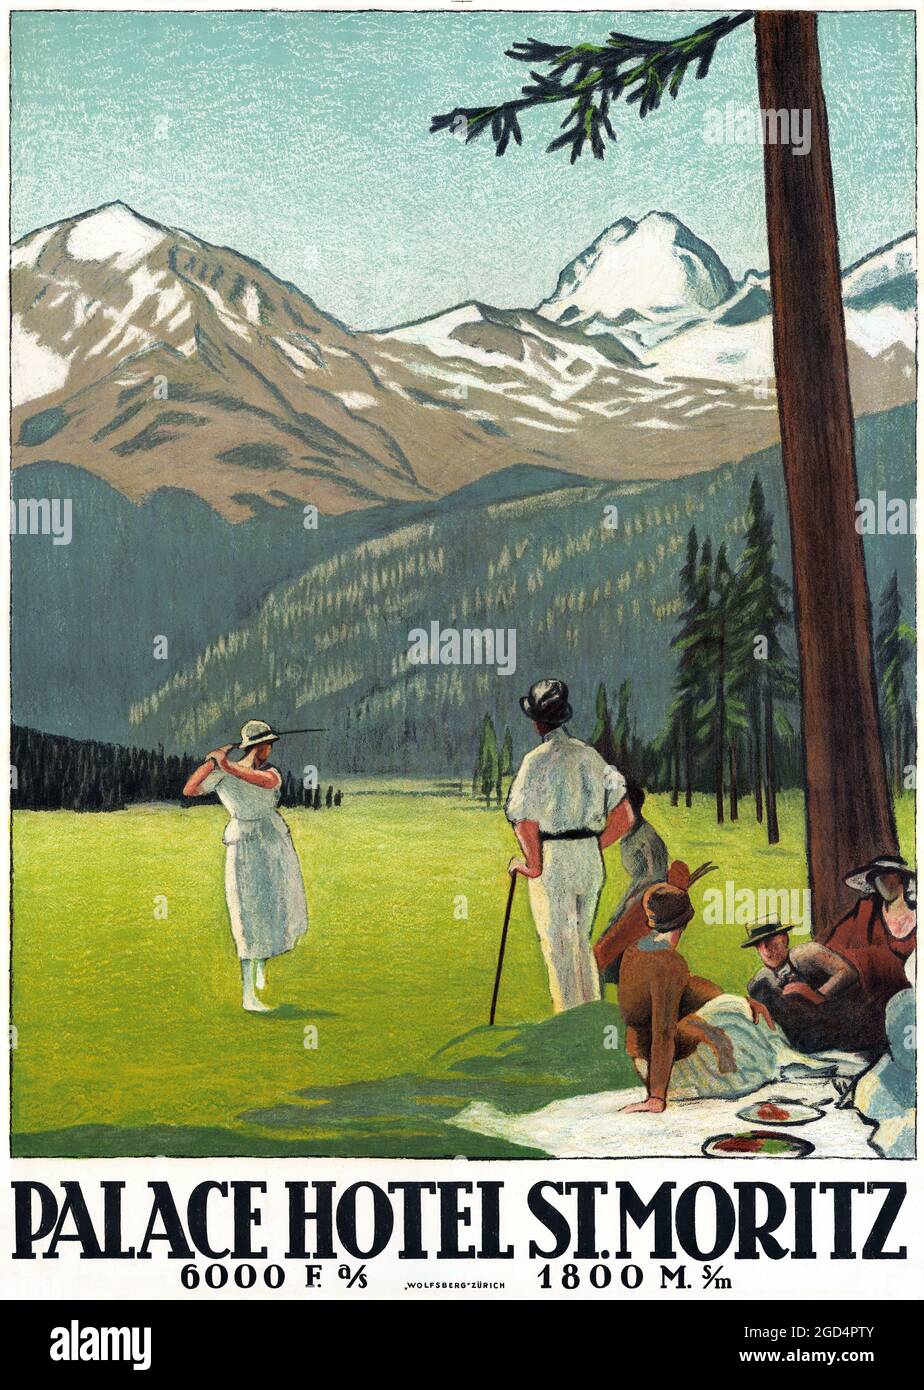 Palace Hotel St. Moritz by Emil Cardinaux (1877-1936). Restored vintage poster published in 1921 in Switzerland. Stock Photo